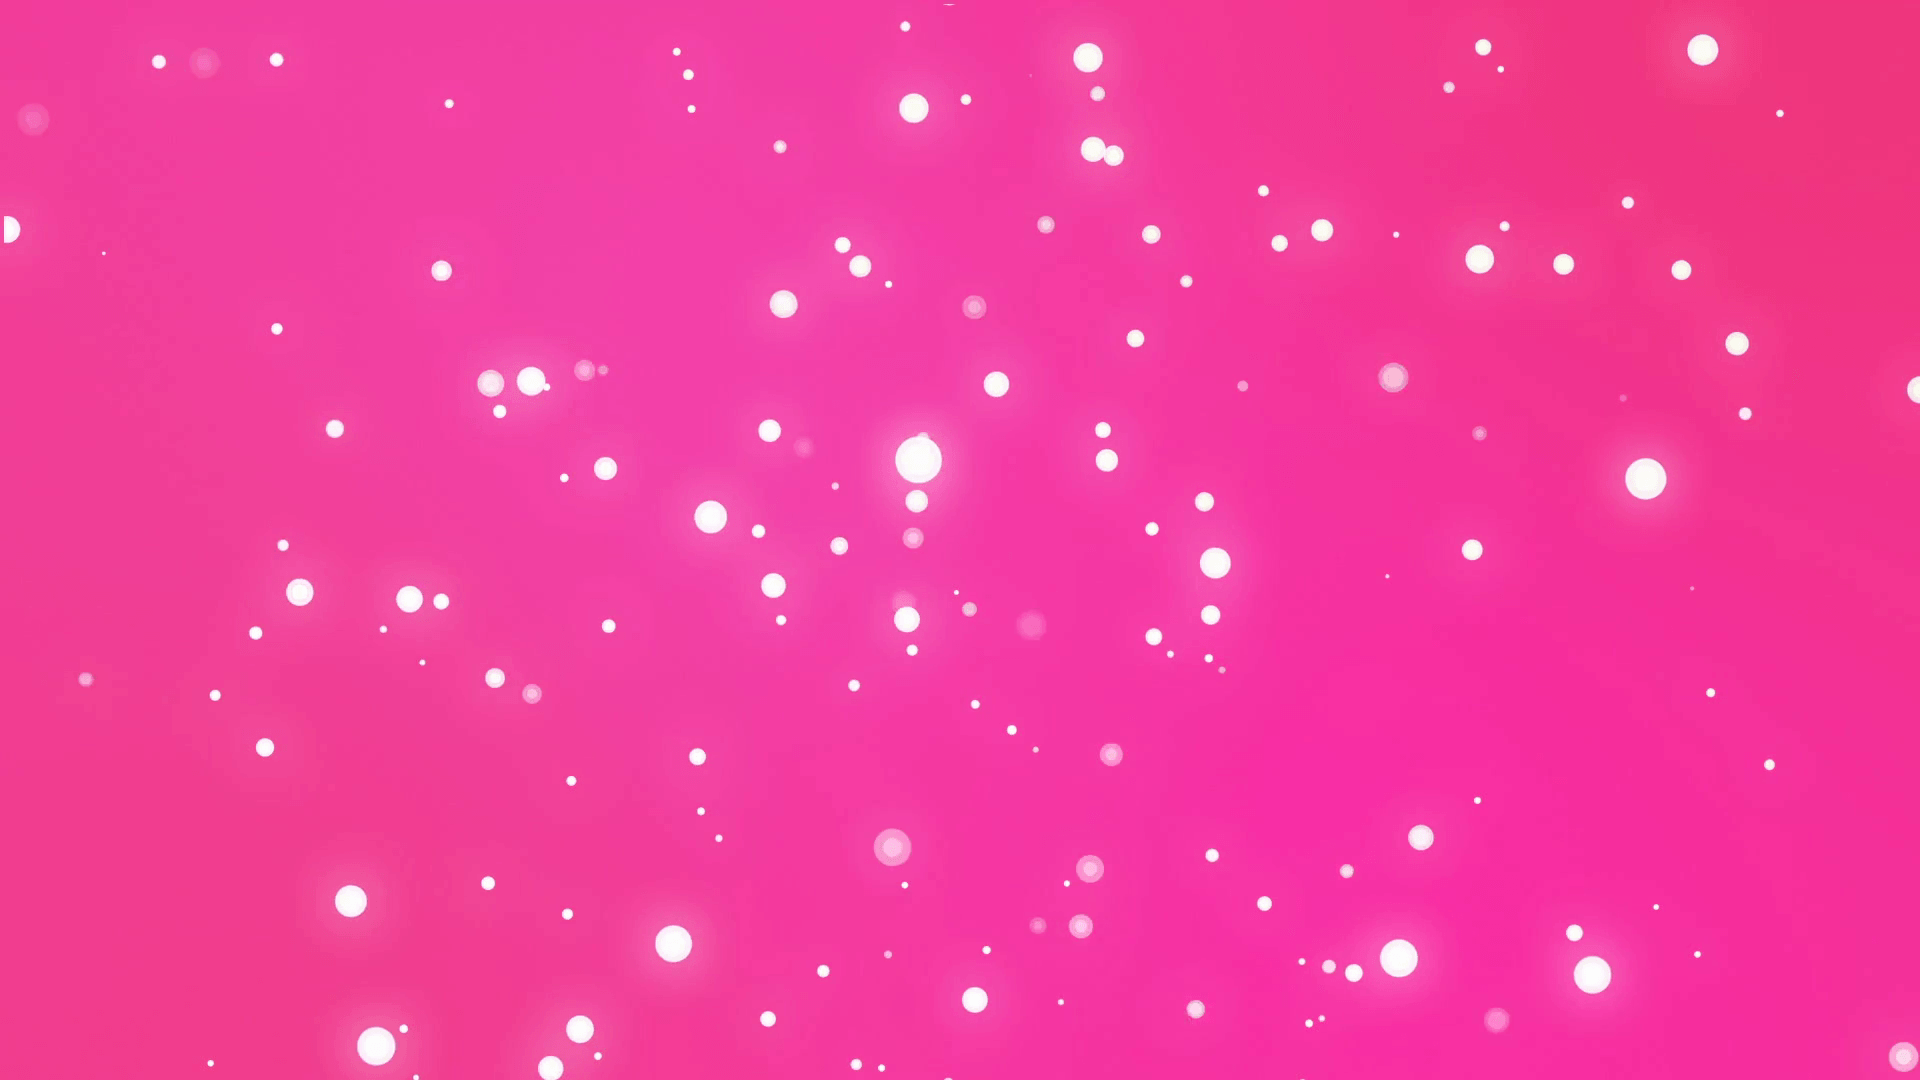 Cute romantic pink gradient background with moving sparkling light